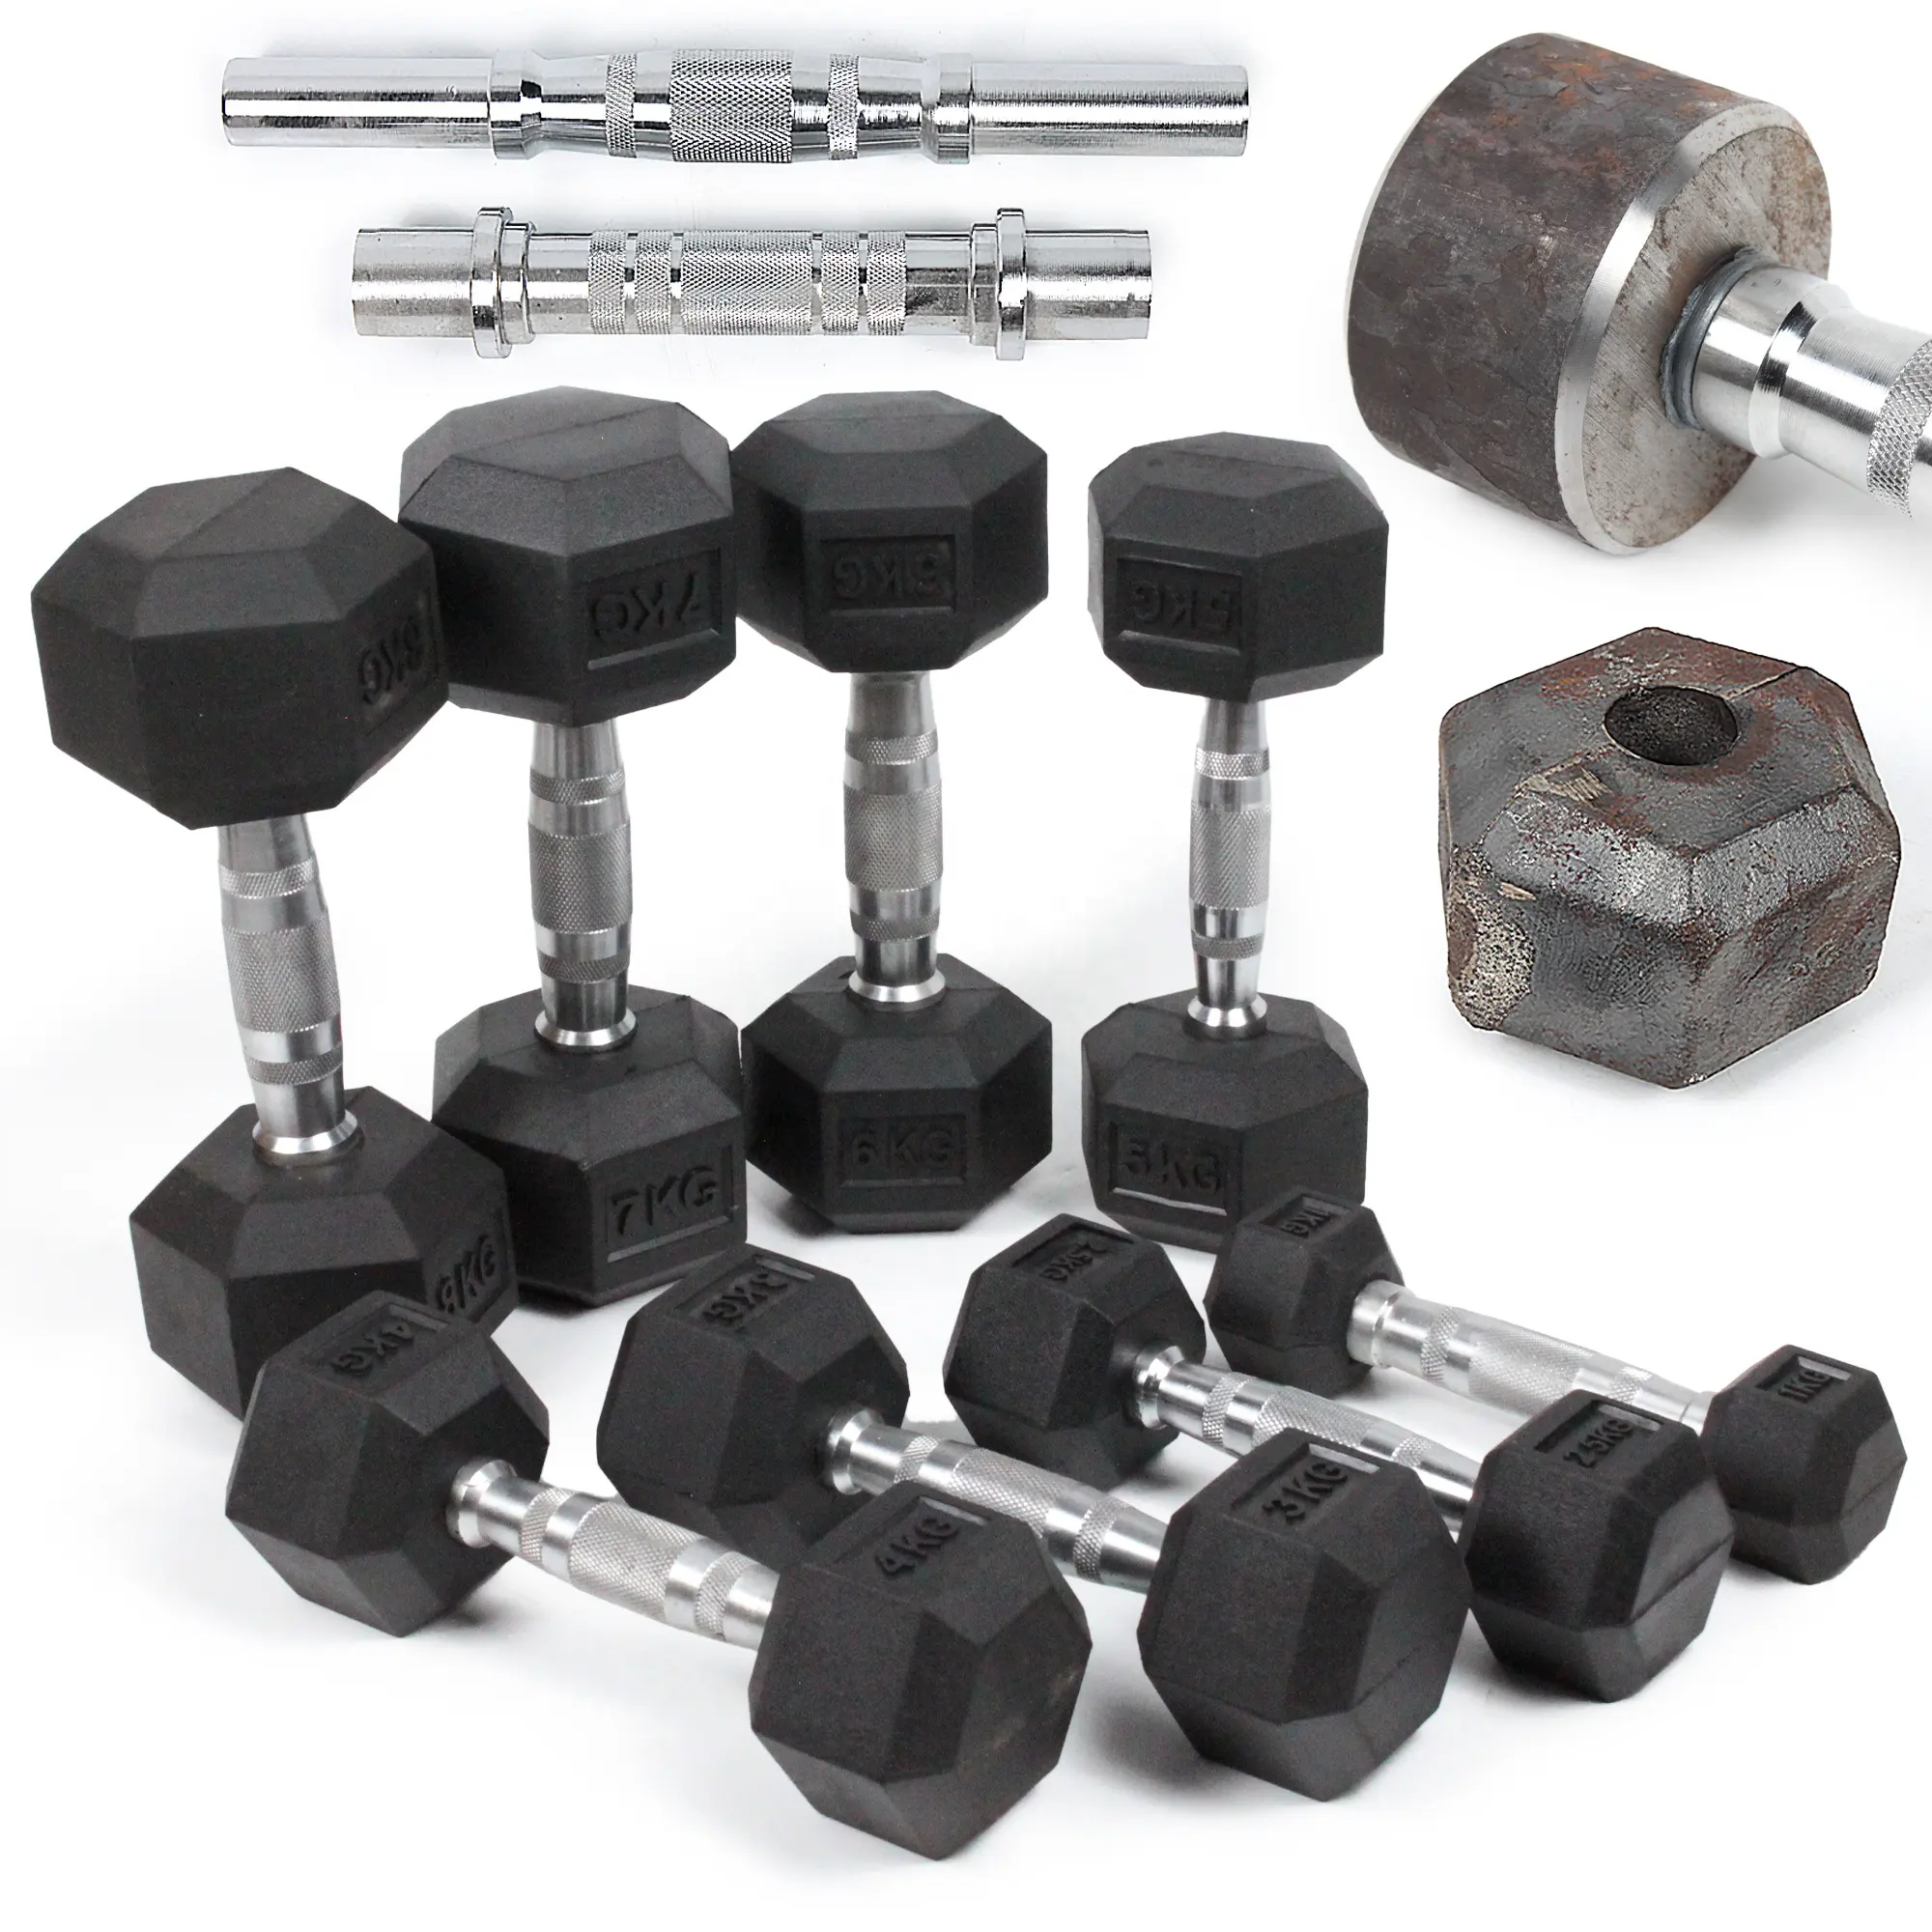 Chrome Cast Iron Hex Coated New Cheap 5-110LBS Gym Kit Dumbbell Set in LBS for the Gym